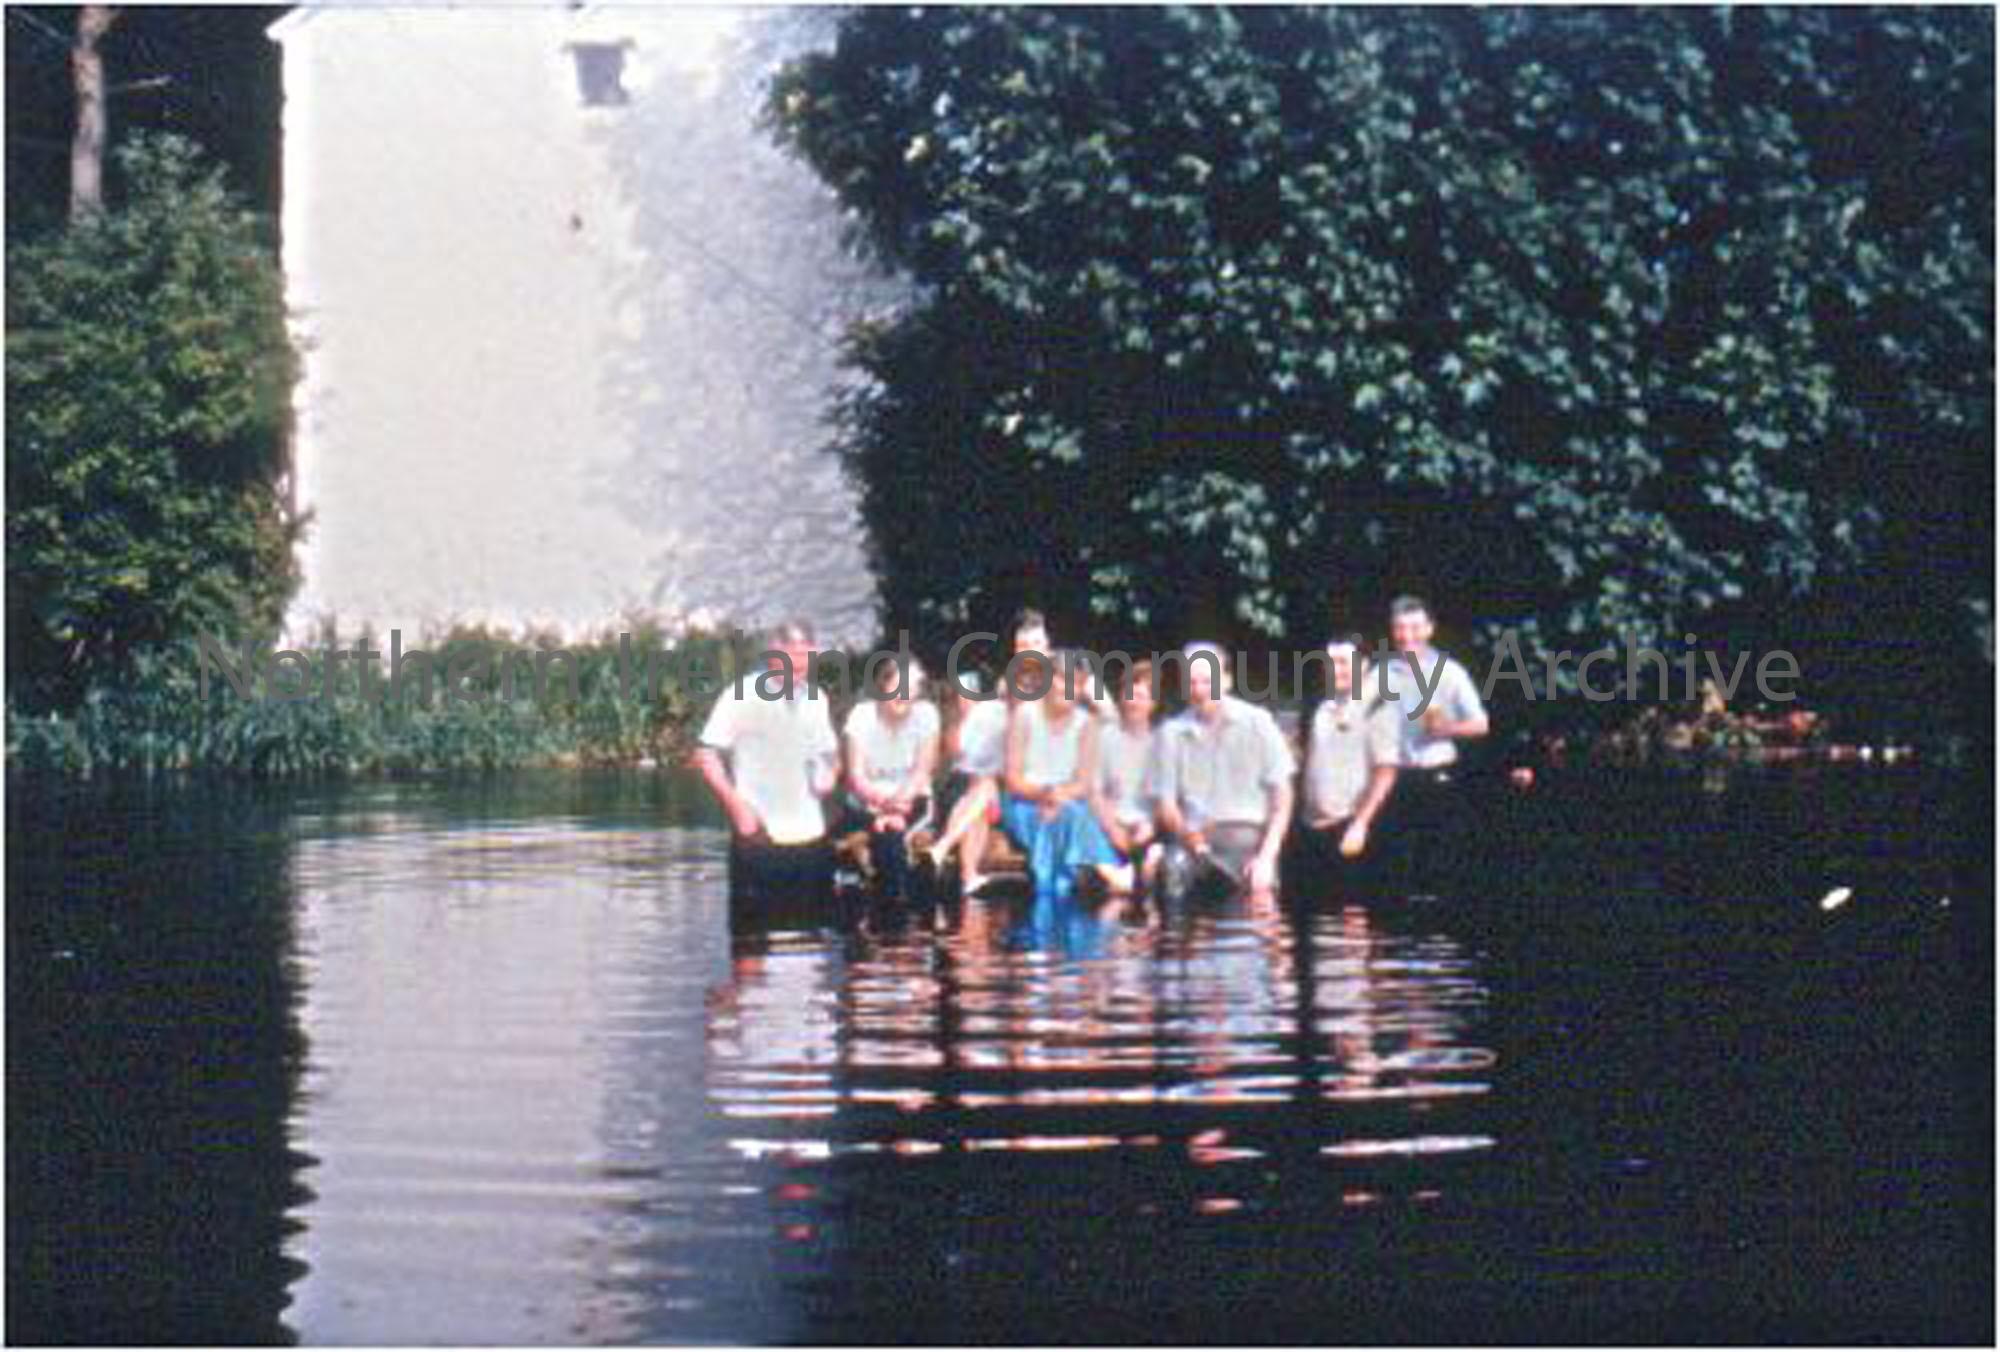 Dervock Community Association members, on the infamous Duck Island, in the Stracham (or often referred to by it’s old name, Blackwater) River